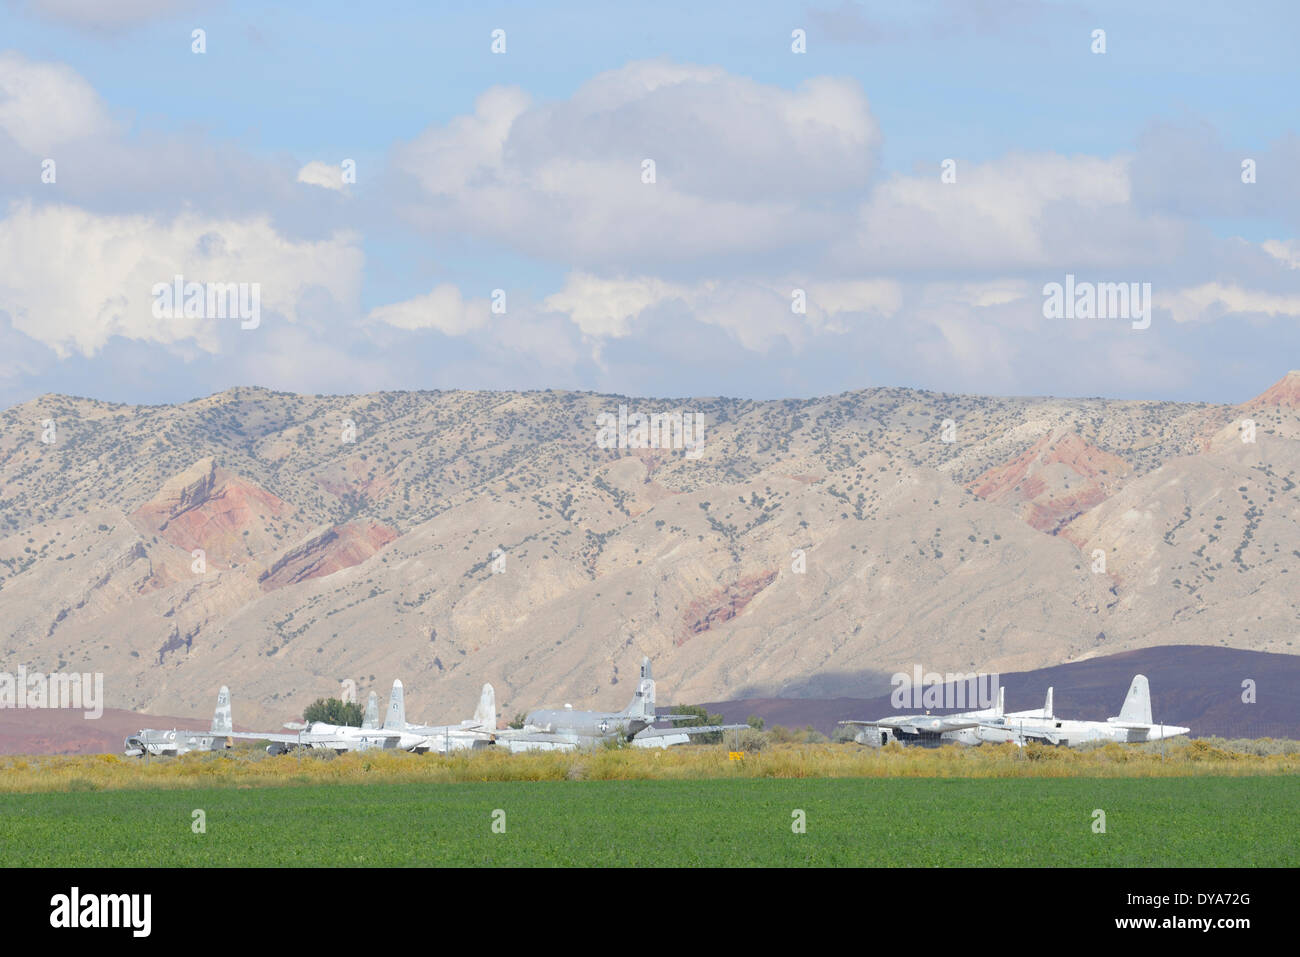 America, Wyoming, USA, United States, Air field, planes, Powell, airplanes Stock Photo